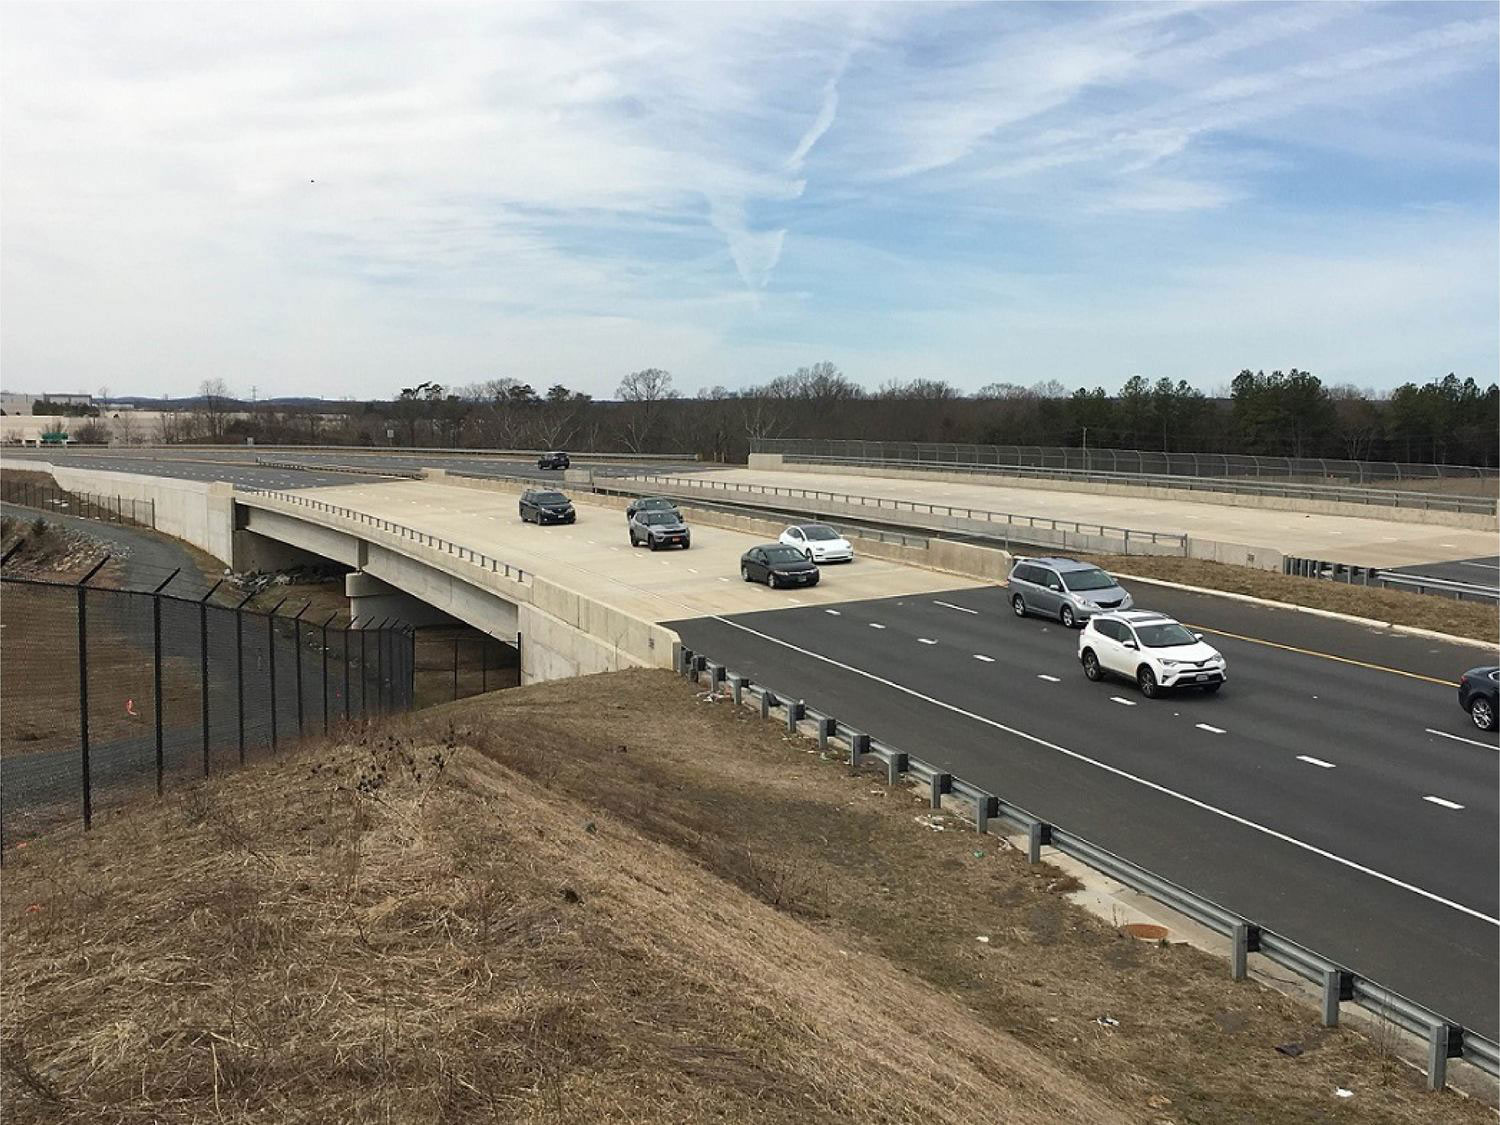 The heavily-used Route 606 Corridor had not seen improvements for more than 50 years before this project was completed. Photo courtesy of Dewberry.